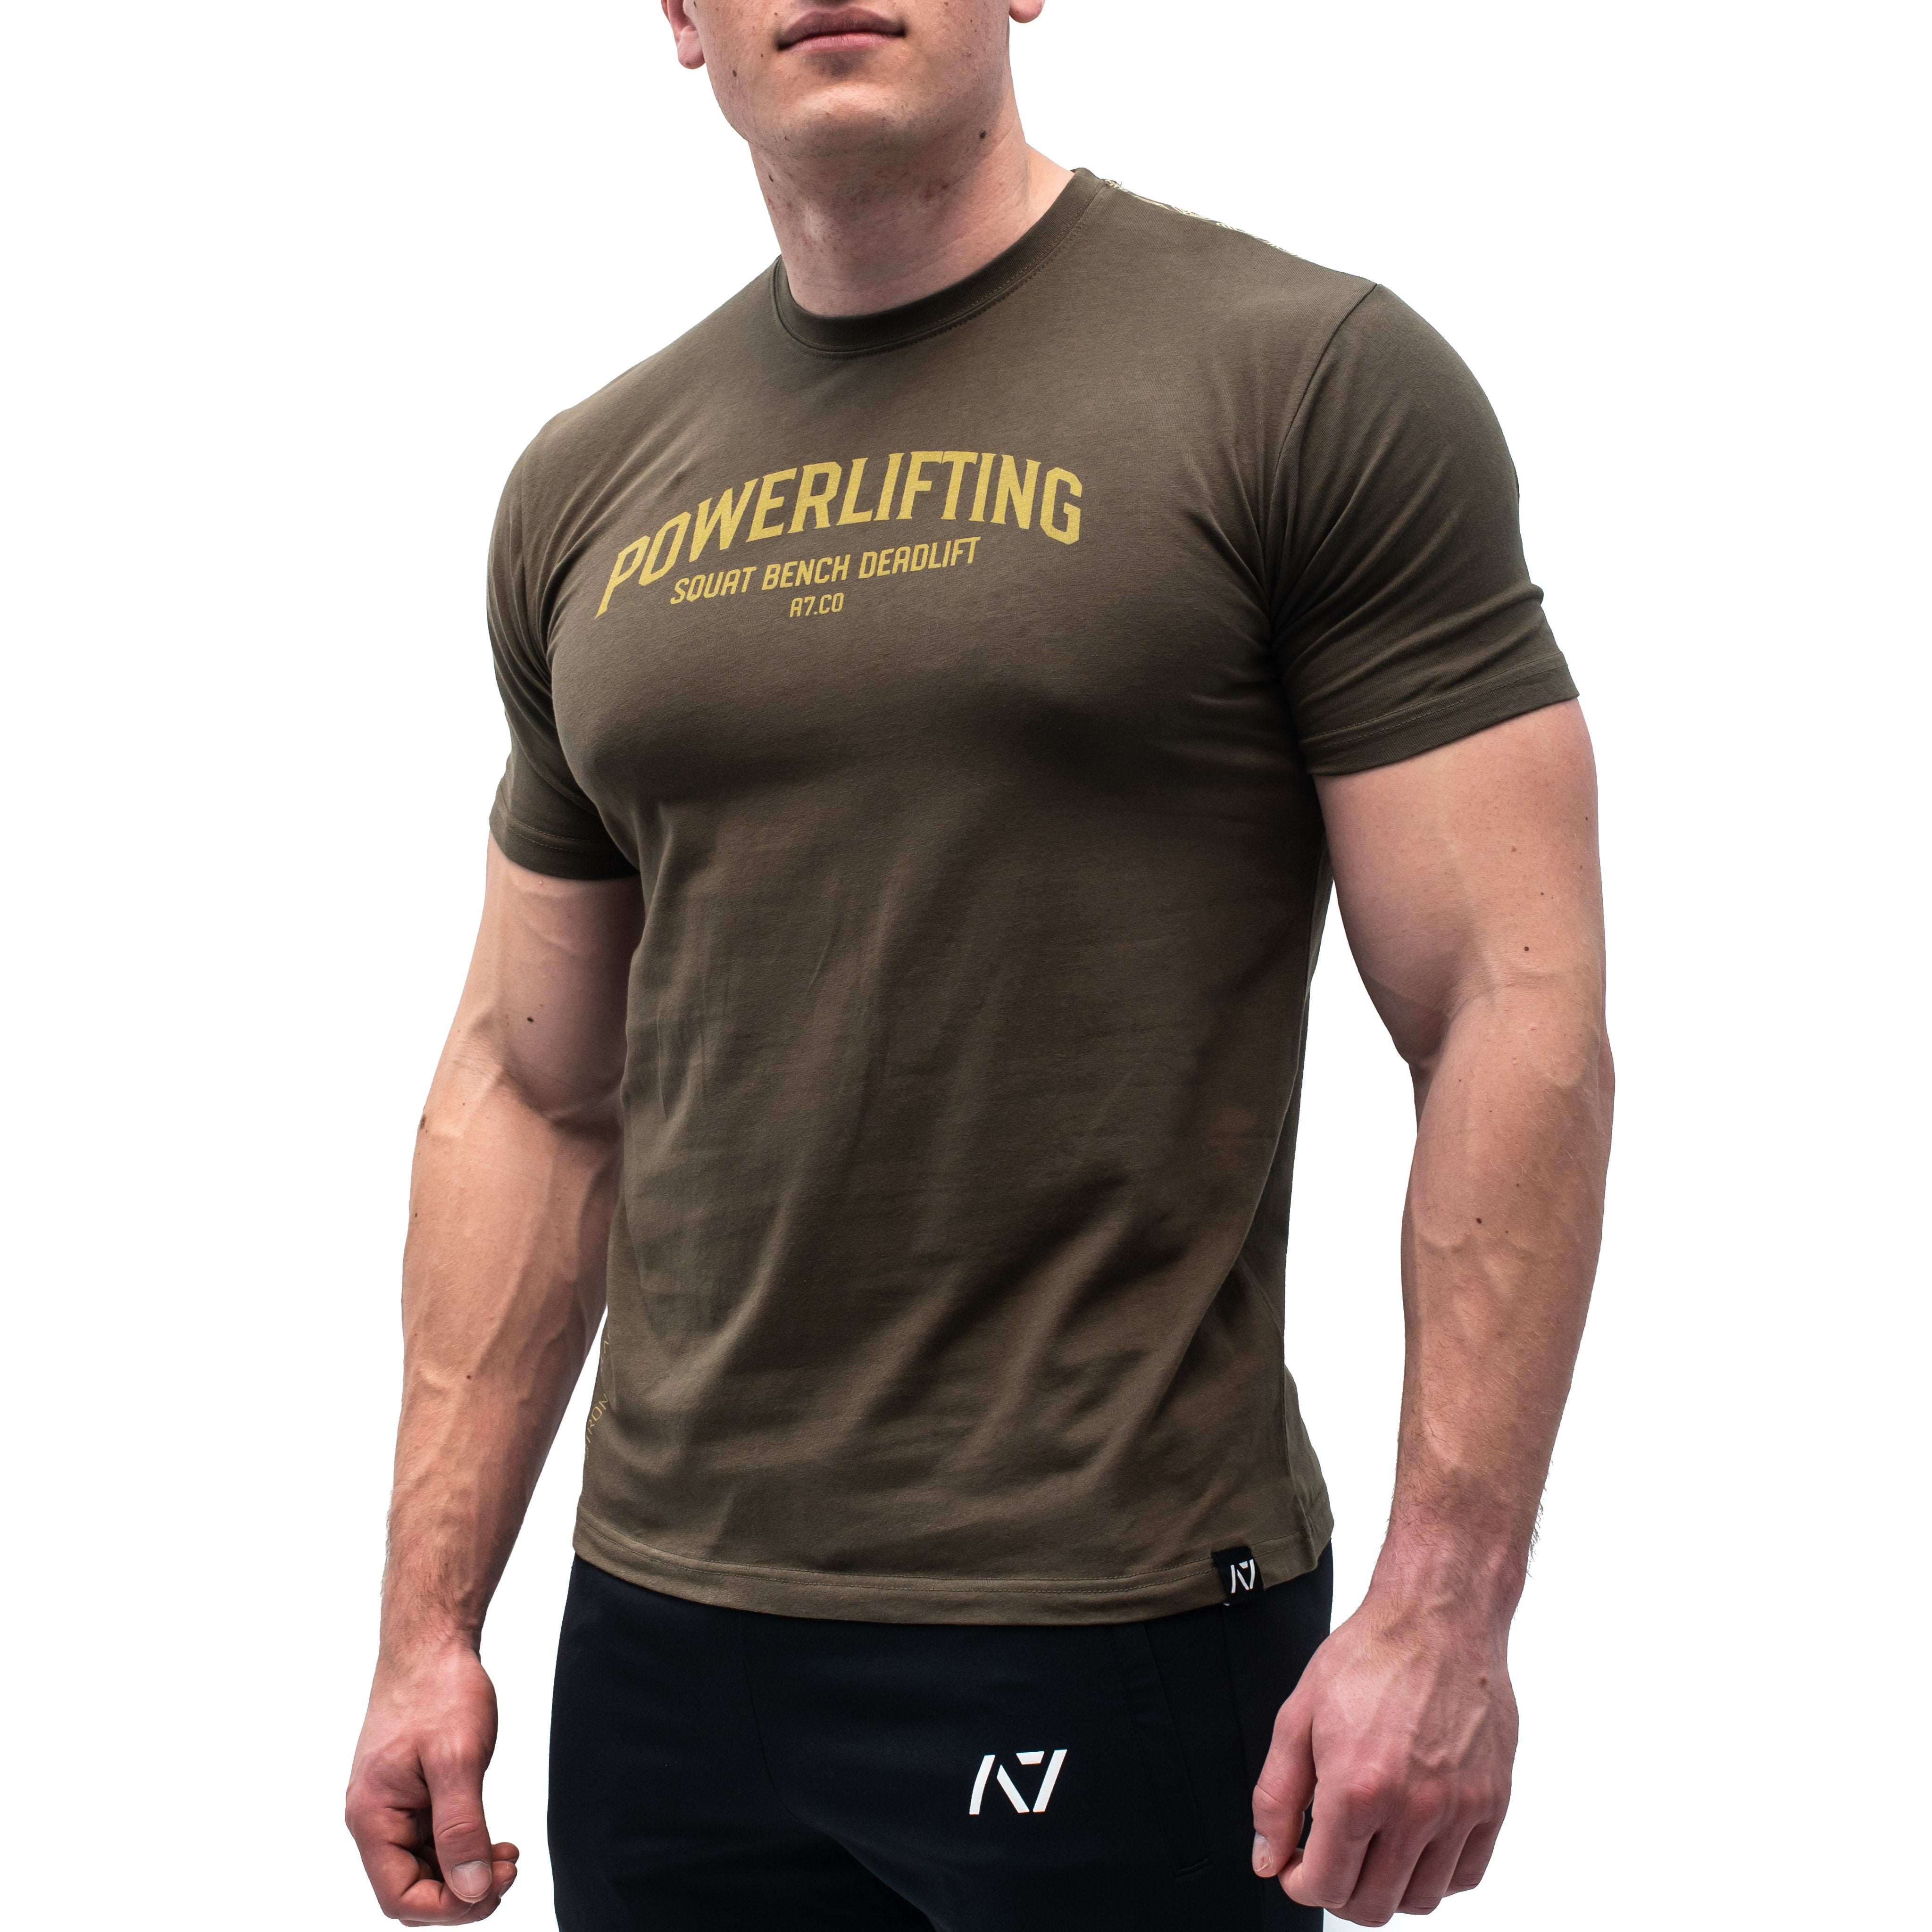 Powerlifting Military Bar Grip T-shirt, great as a squat shirt. Purchase Powerlifting Military Bar Grip tshirt UK from A7 UK or A7 Europe. No more chalk and no more sliding. Best Bar Grip Tshirts, shipping to UK and Europe from A7 UK or A7 Europe. The best Powerlifting apparel for all your workouts. Available in UK and Europe including France, Italy, Germany, Sweden and Poland